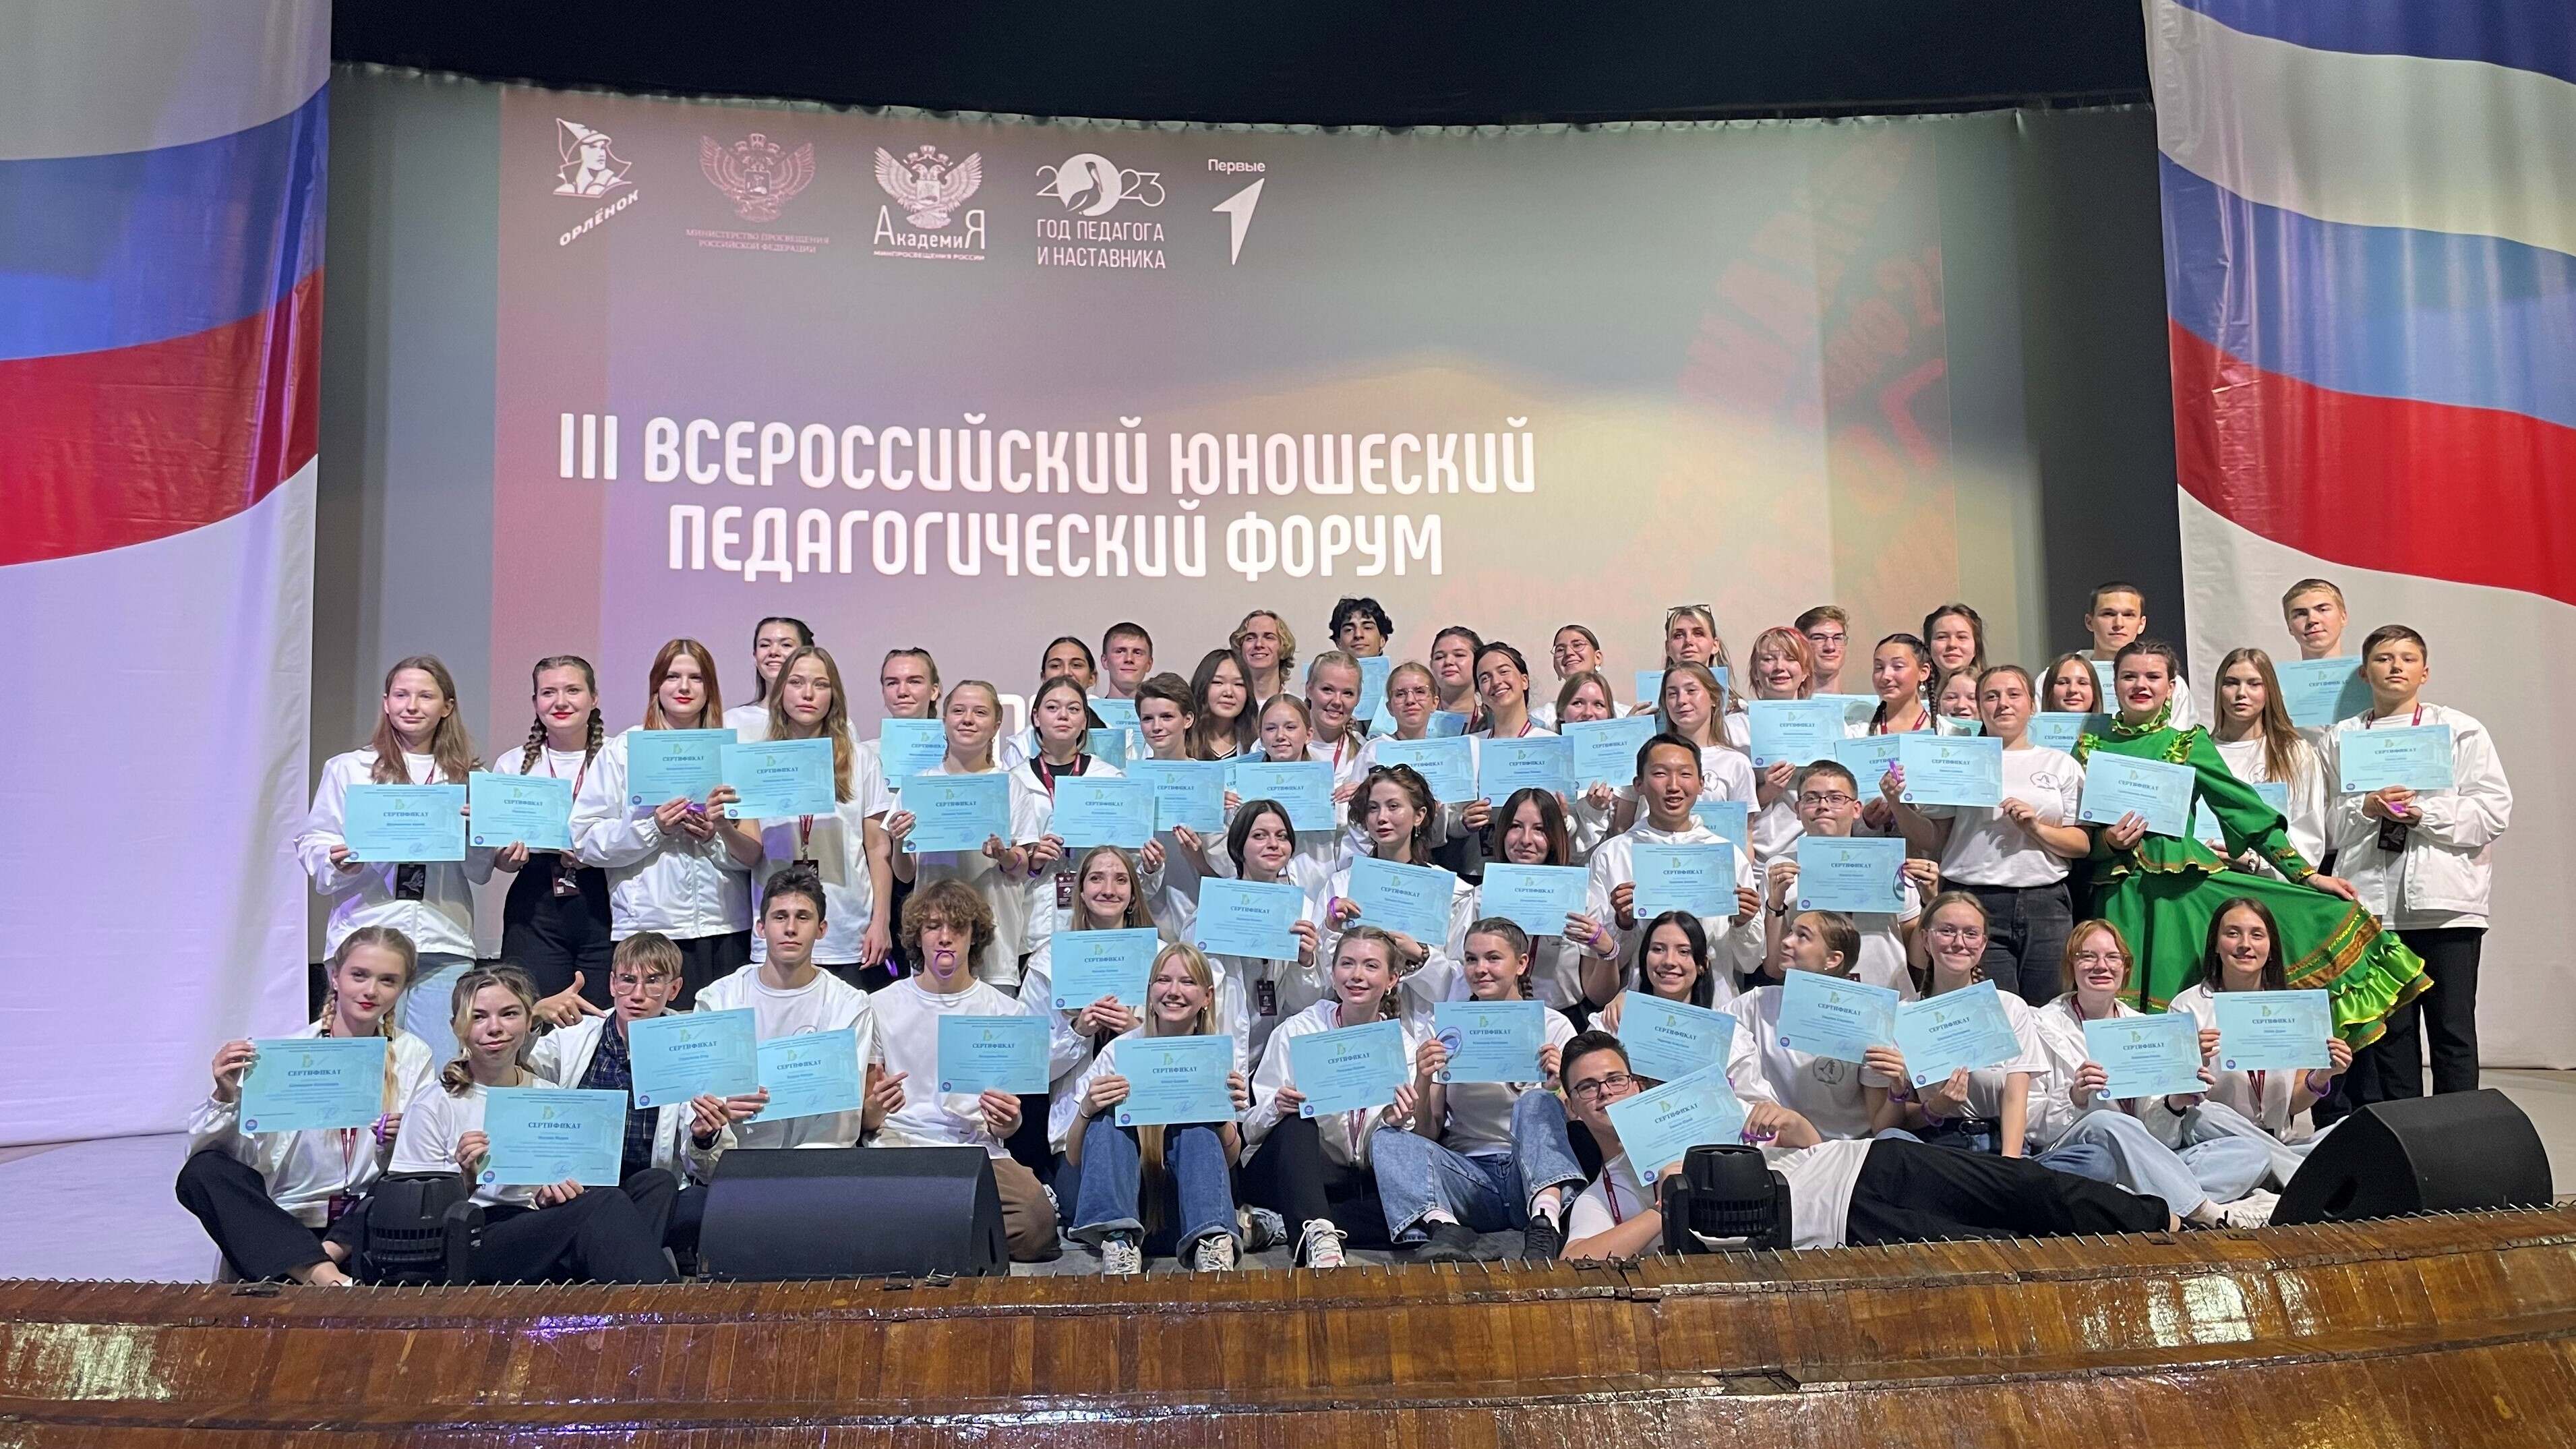 The III All-Russian Youth Pedagogical Forum ended in “Orlyonok”